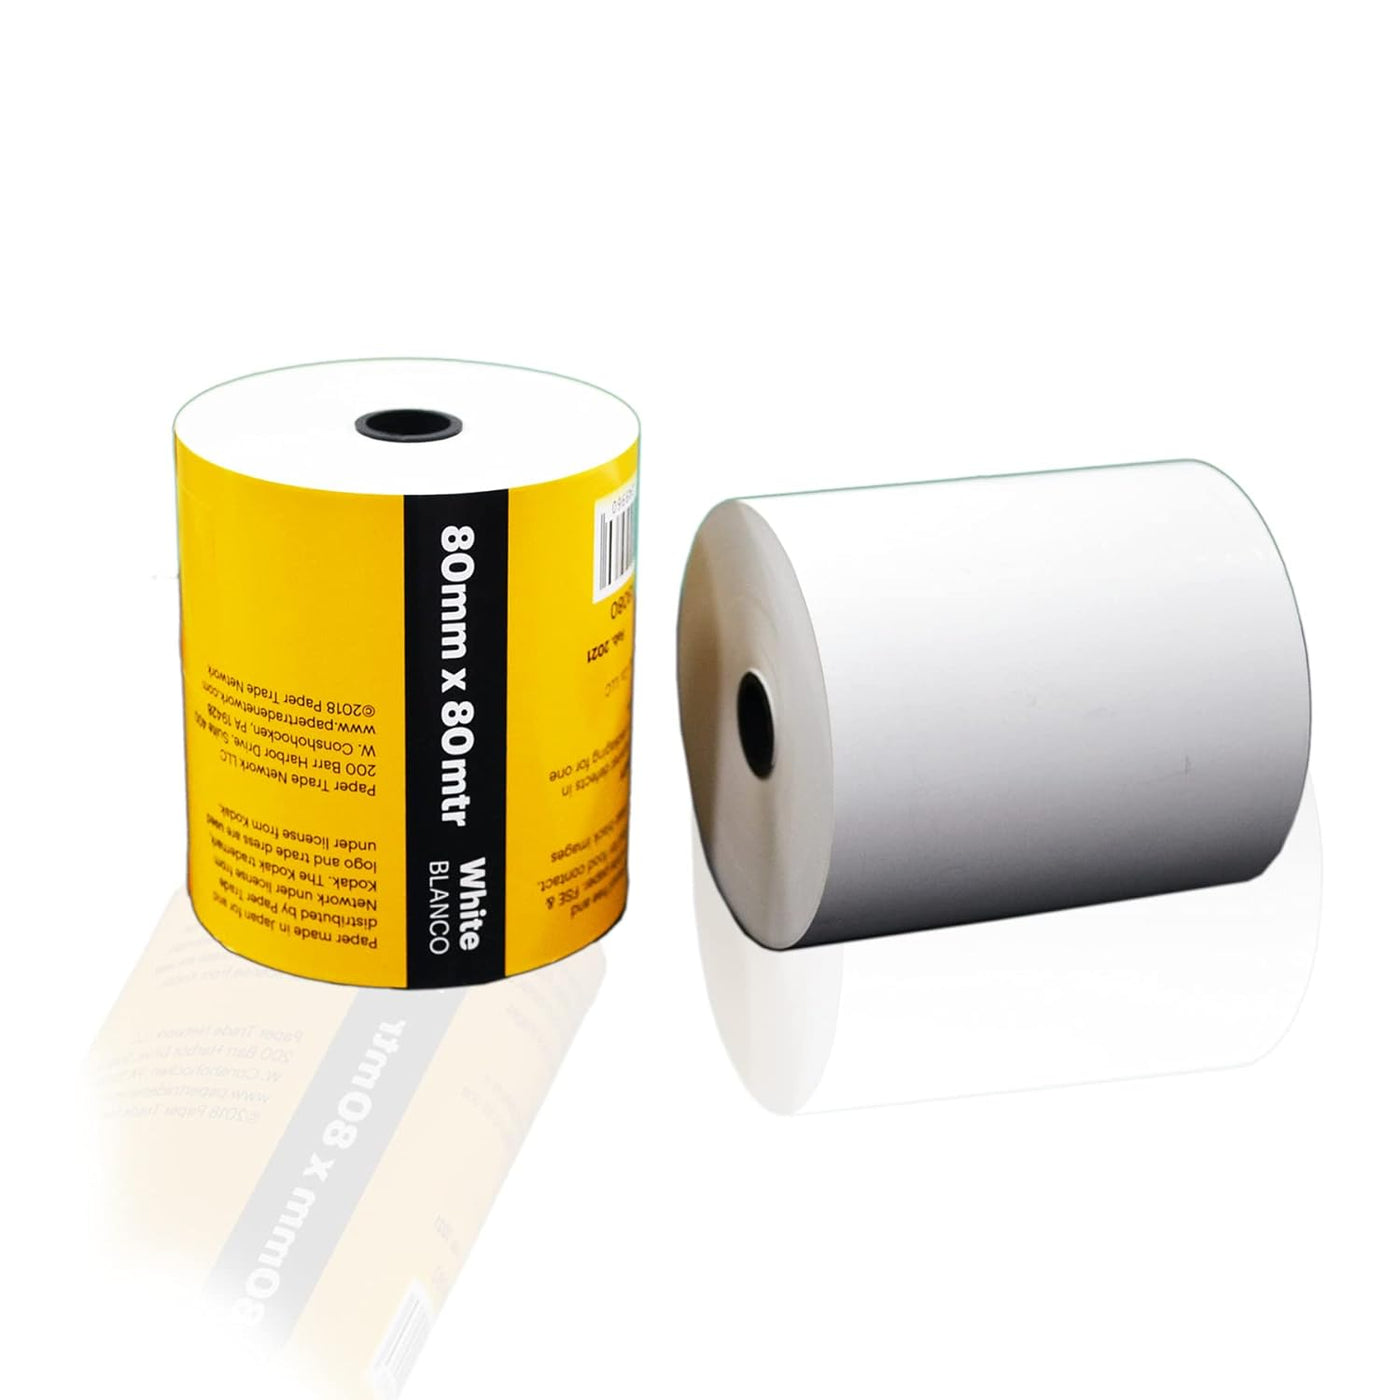 Thermal Paper Roll for Mini Portable Printer or Toy Camera Printer (pack of three pieces)